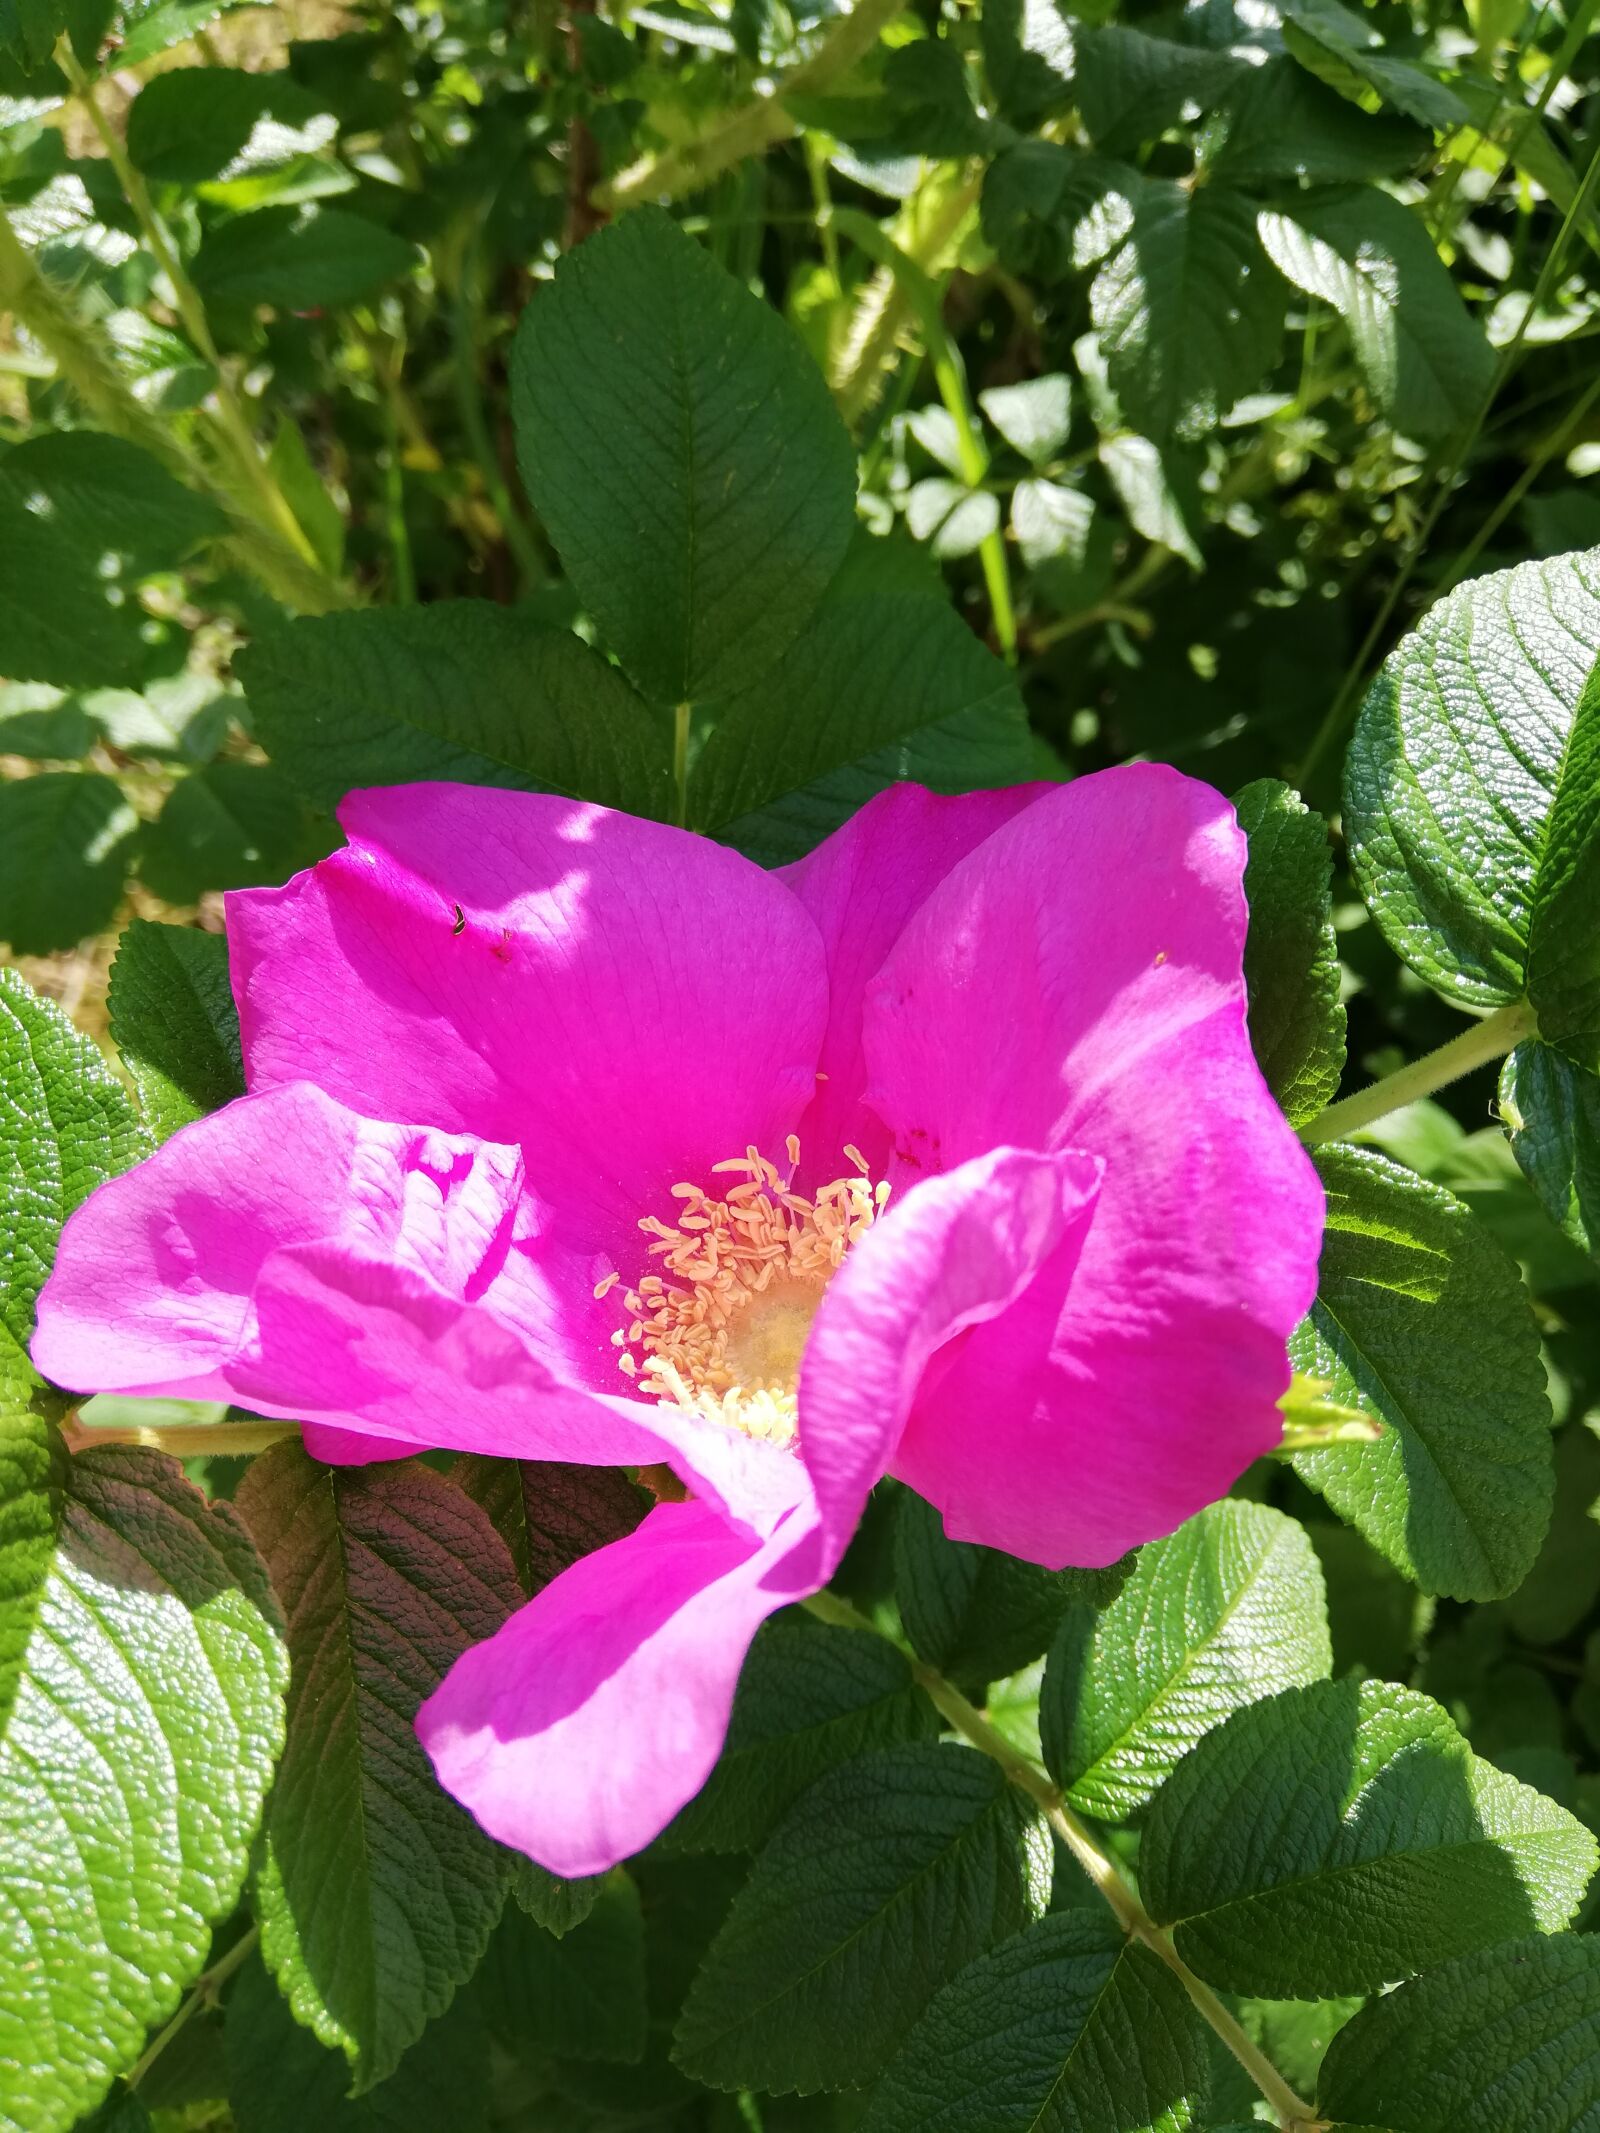 HUAWEI P20 lite sample photo. Rose, red, day photography